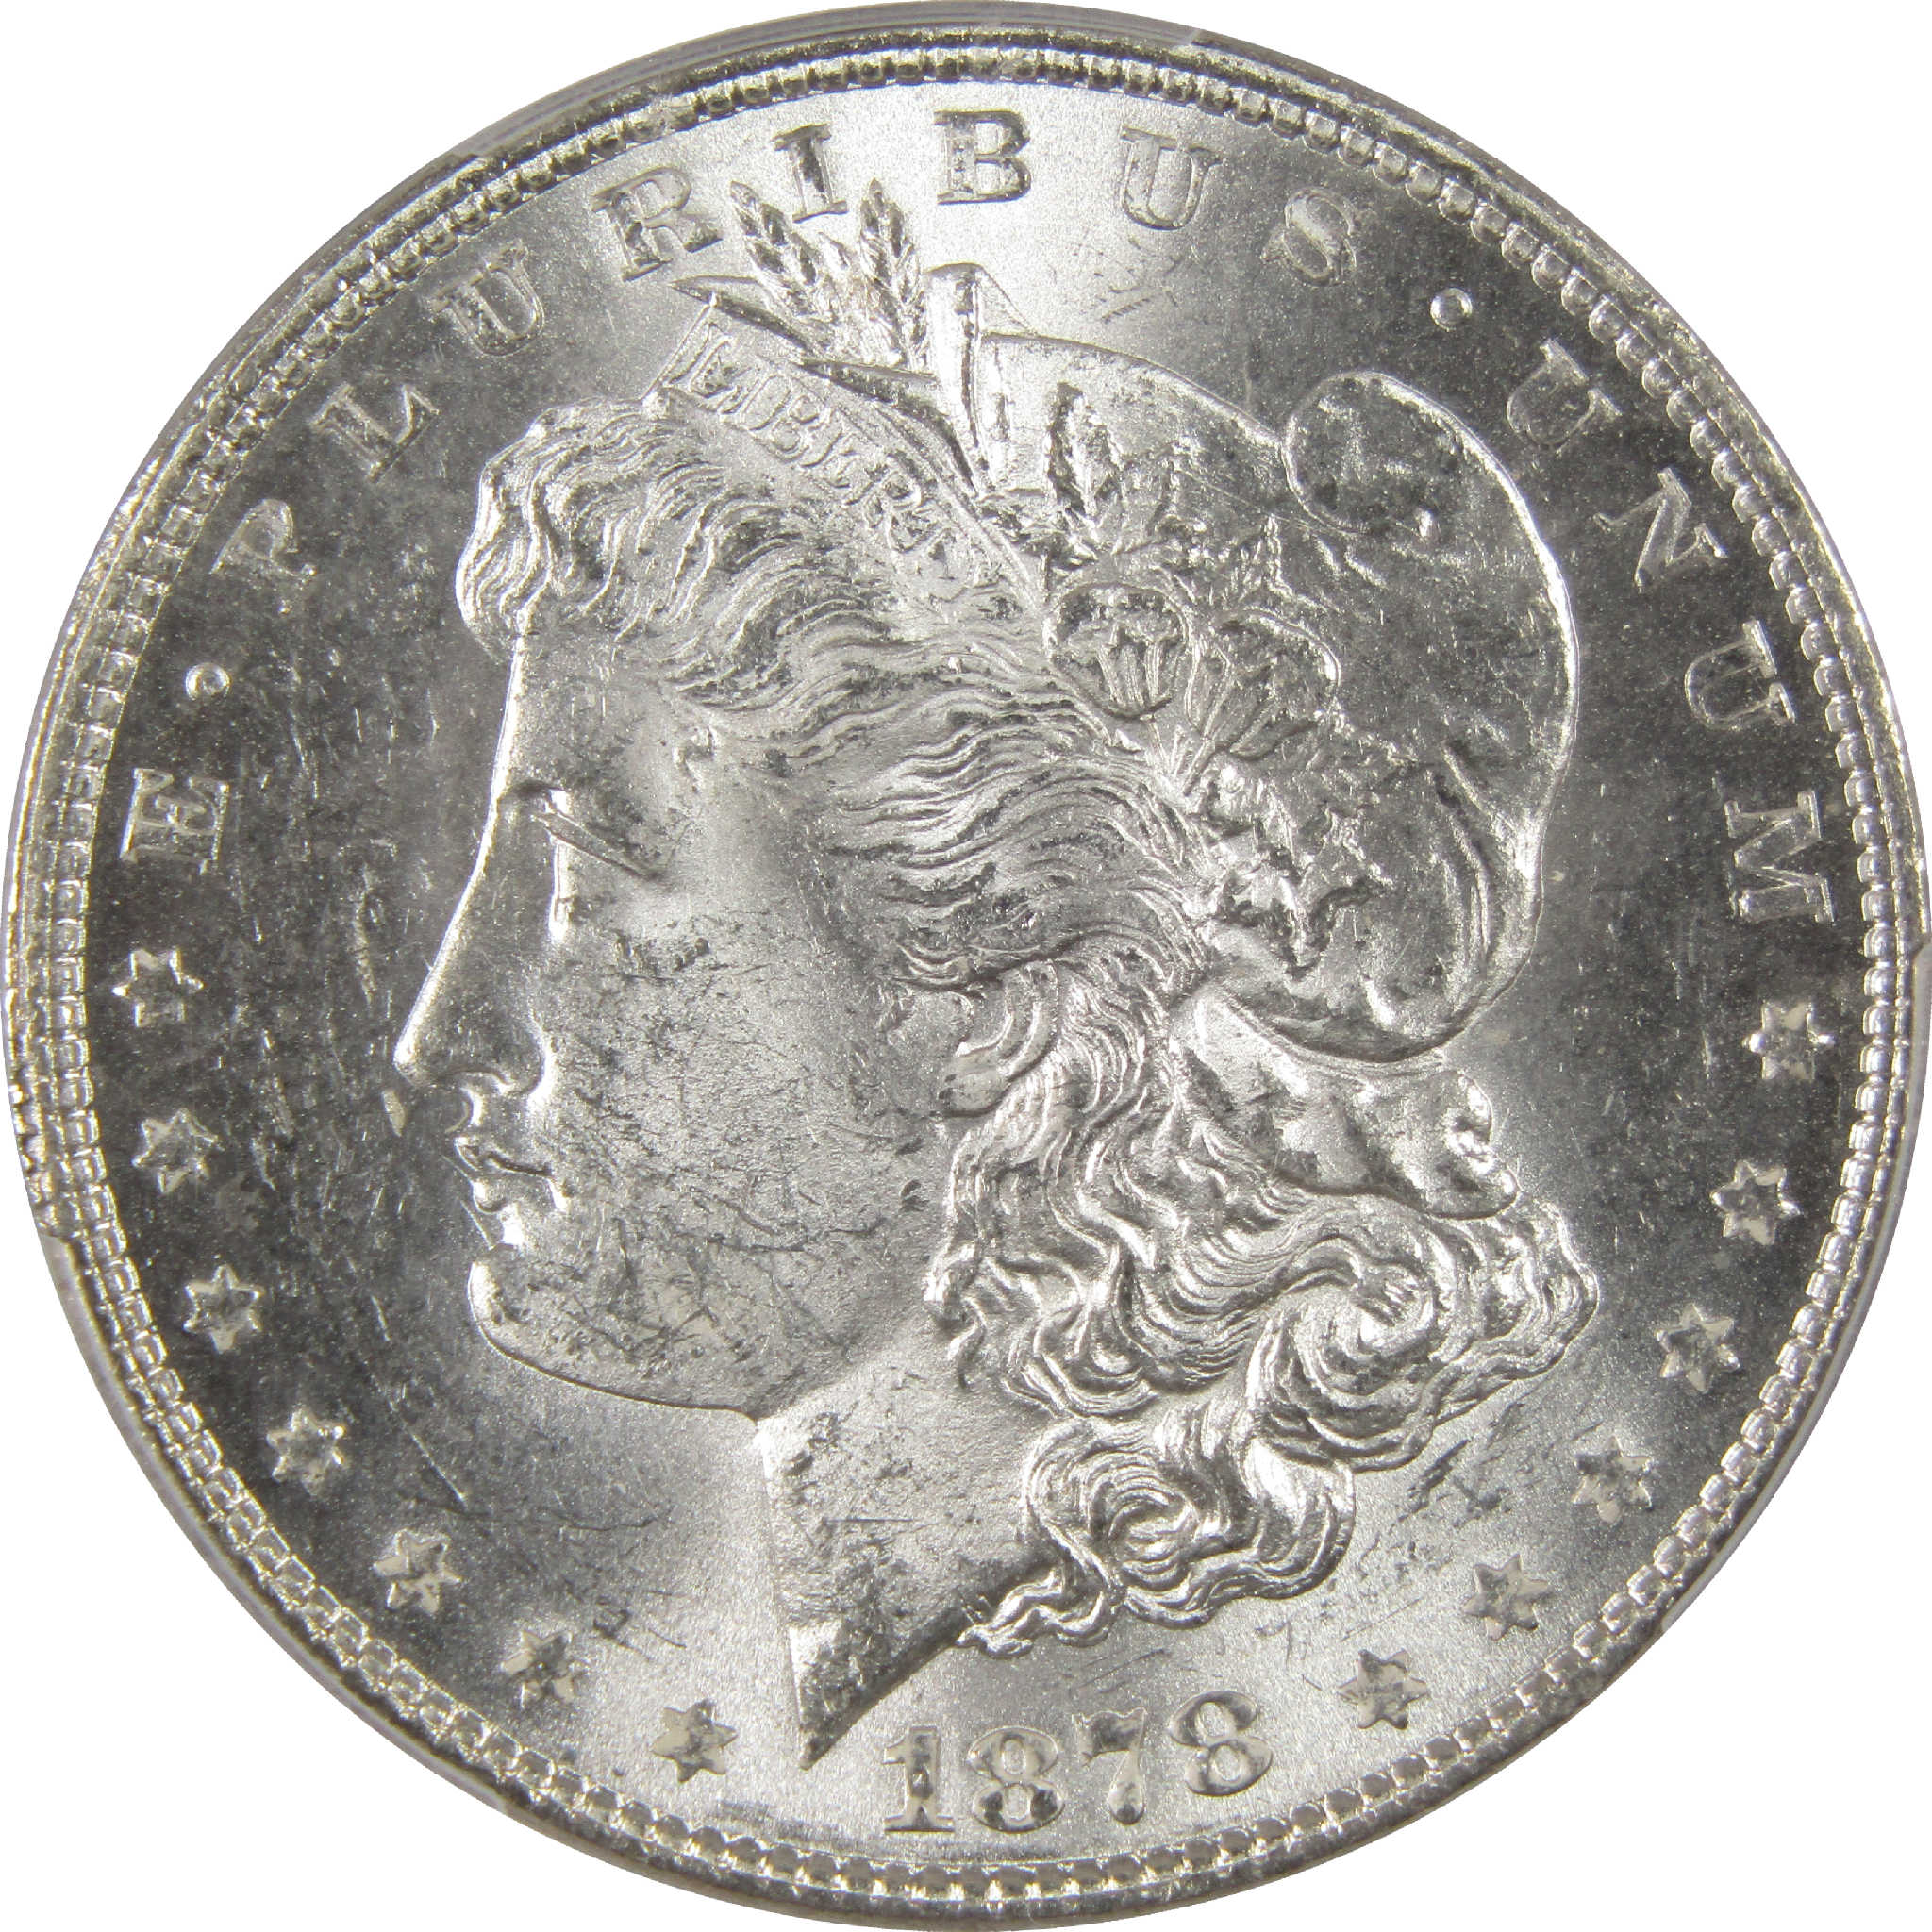 1878 7TF Rev 79 Morgan Dollar MS 62 PCGS Silver $1 Unc SKU:I11312 - Morgan coin - Morgan silver dollar - Morgan silver dollar for sale - Profile Coins &amp; Collectibles